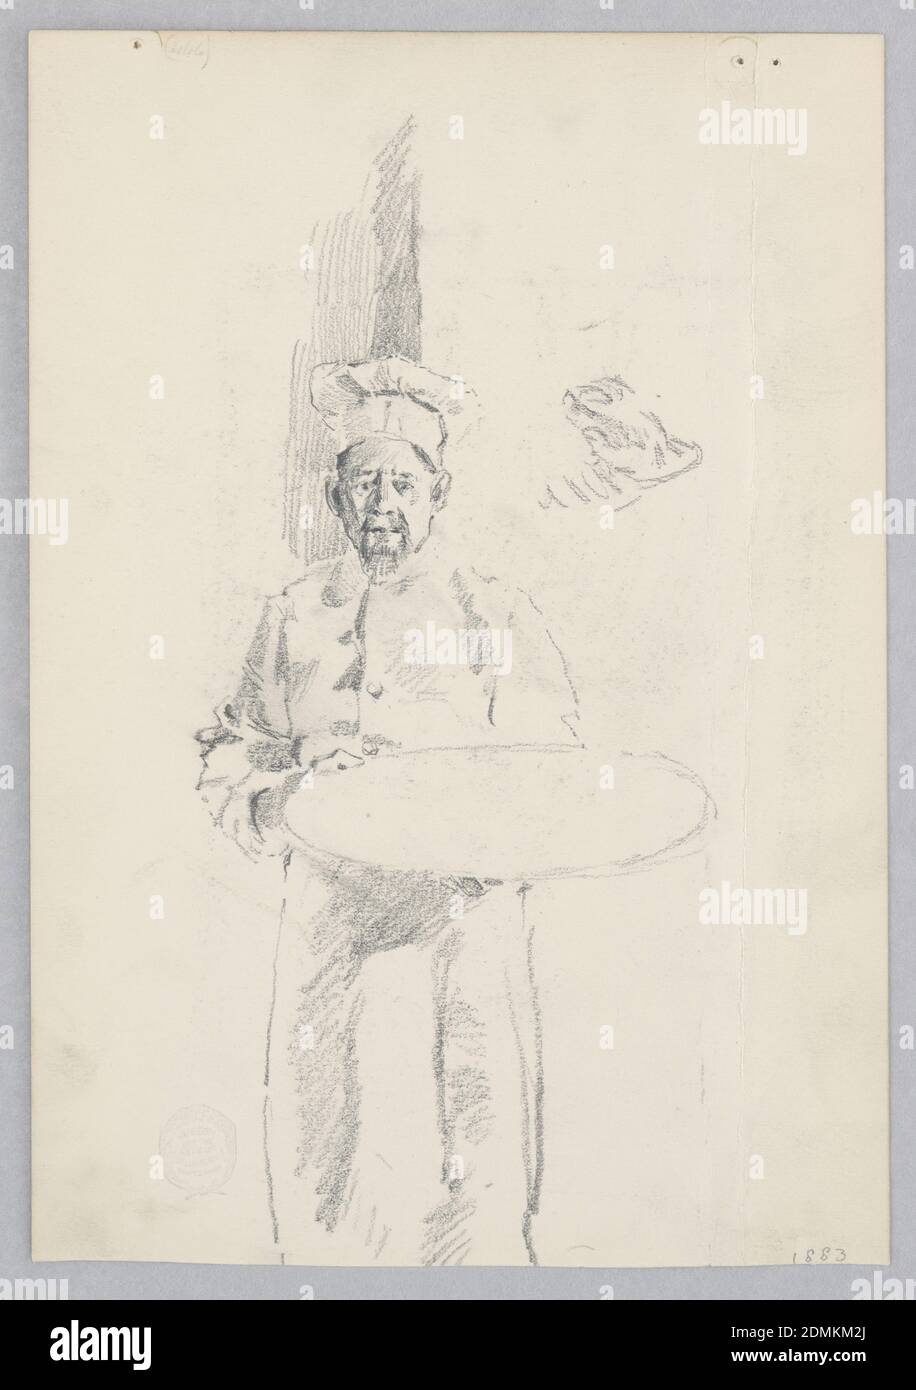 Man, Robert Frederick Blum, American, 1857–1903, Graphite, pastel crayon on wove paper, Sketch of a male figure holding a tray., USA, 1883, figures, Drawing Stock Photo